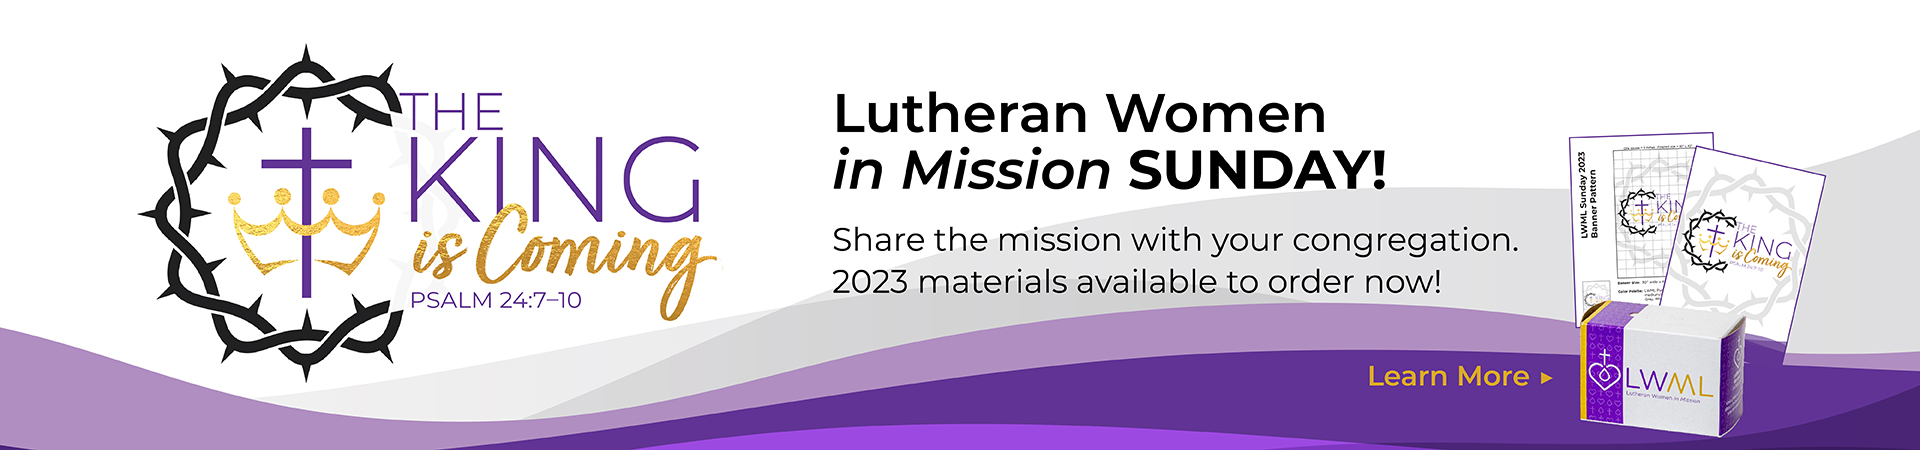 Lutheran Women in Mission Sunday! Share the mission with your congregation. Materials available to order now! Learn More.